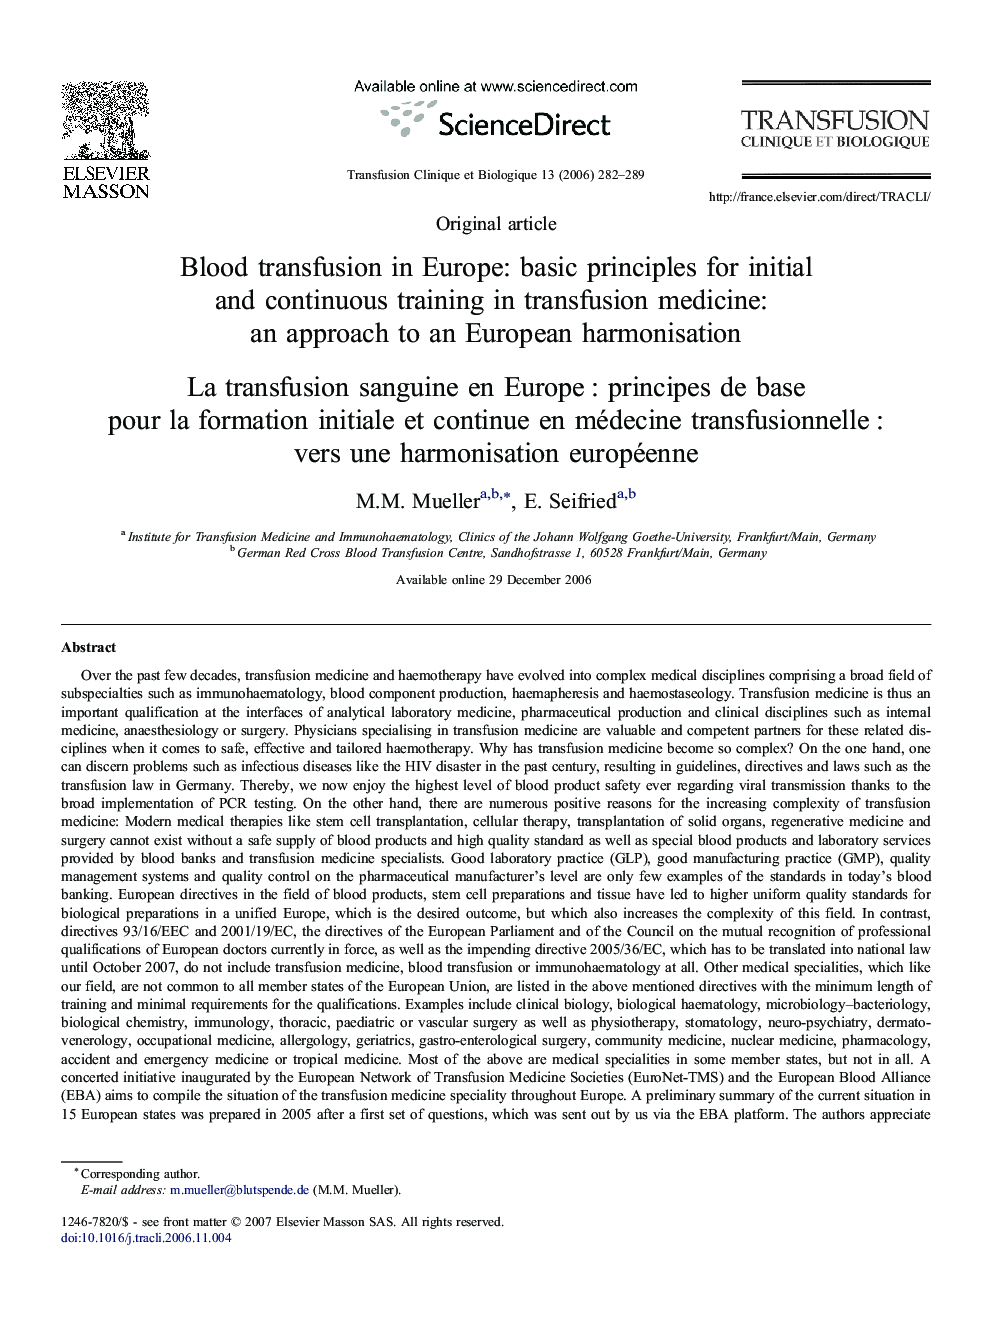 Blood transfusion in Europe: basic principles for initial and continuous training in transfusion medicine: an approach to an European harmonisation